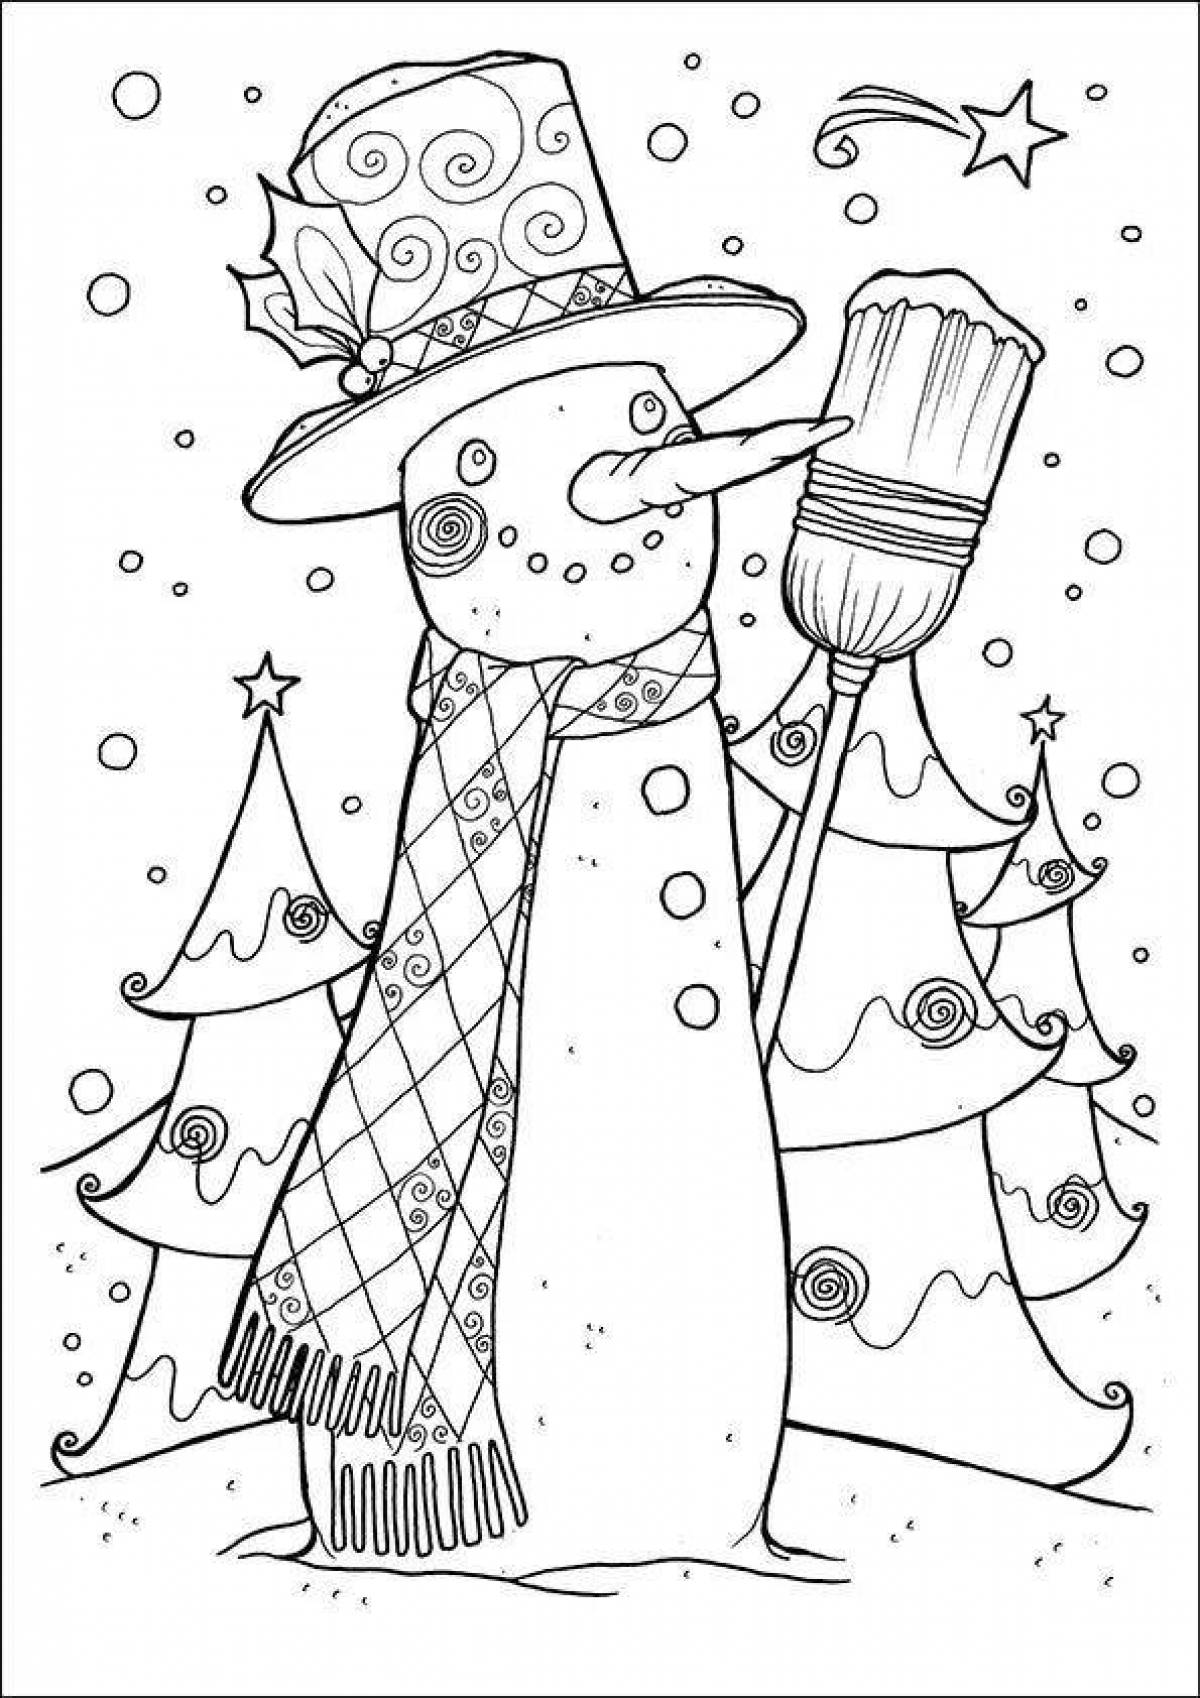 Exciting anti-stress snowman coloring book